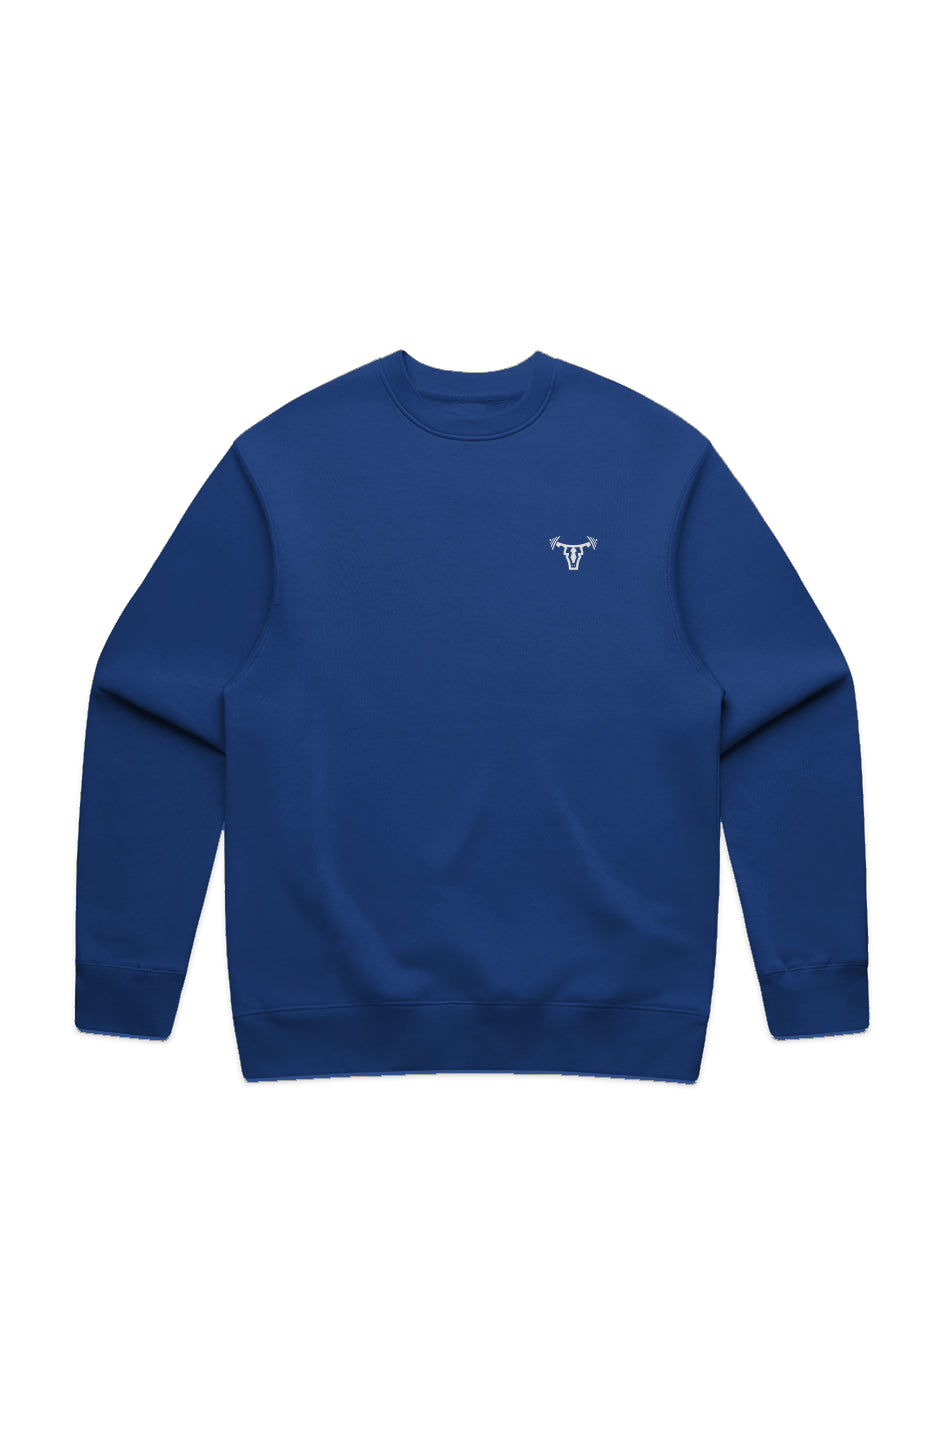 ICONIC MENS RELAX CREW BLUE